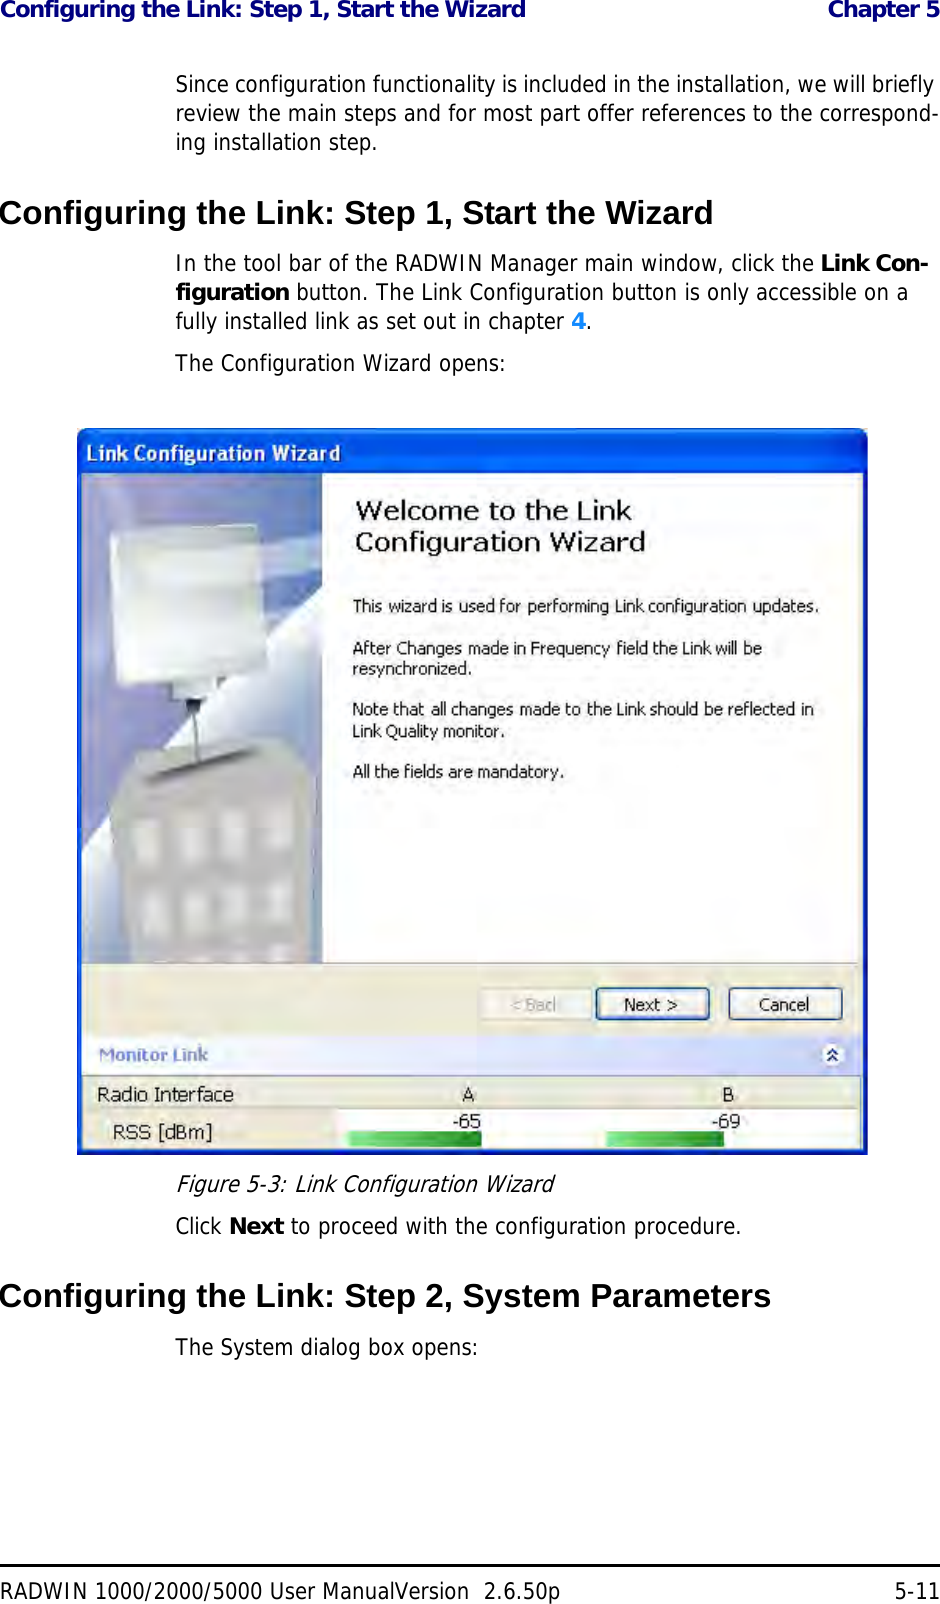 Configuring the Link: Step 1, Start the Wizard  Chapter 5RADWIN 1000/2000/5000 User ManualVersion  2.6.50p 5-11Since configuration functionality is included in the installation, we will briefly review the main steps and for most part offer references to the correspond-ing installation step.Configuring the Link: Step 1, Start the WizardIn the tool bar of the RADWIN Manager main window, click the Link Con-figuration button. The Link Configuration button is only accessible on a fully installed link as set out in chapter 4.The Configuration Wizard opens:Figure 5-3: Link Configuration WizardClick Next to proceed with the configuration procedure.Configuring the Link: Step 2, System ParametersThe System dialog box opens: